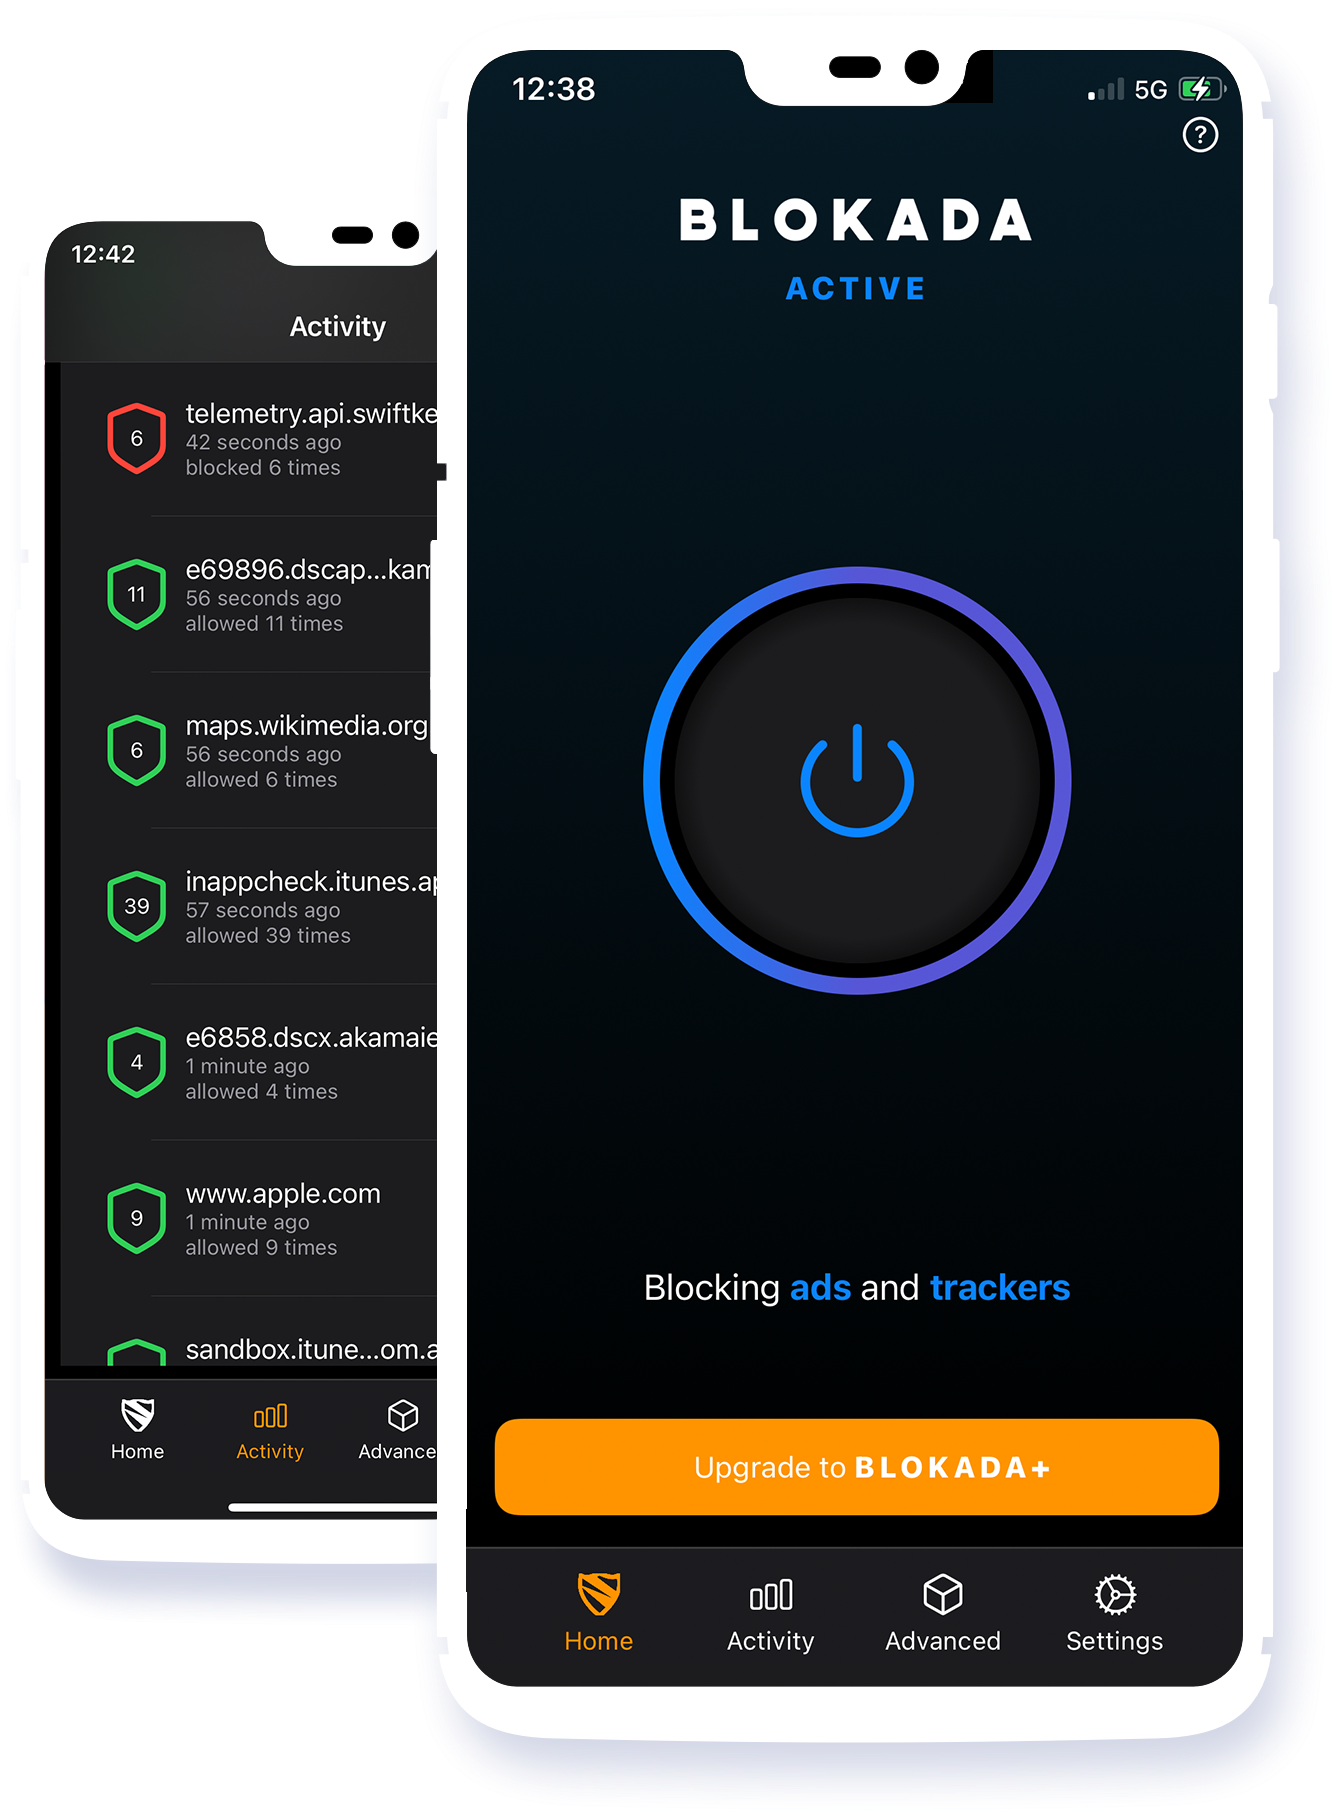 Blokada - the popular mobile adblocker and VPN for Android and iOS